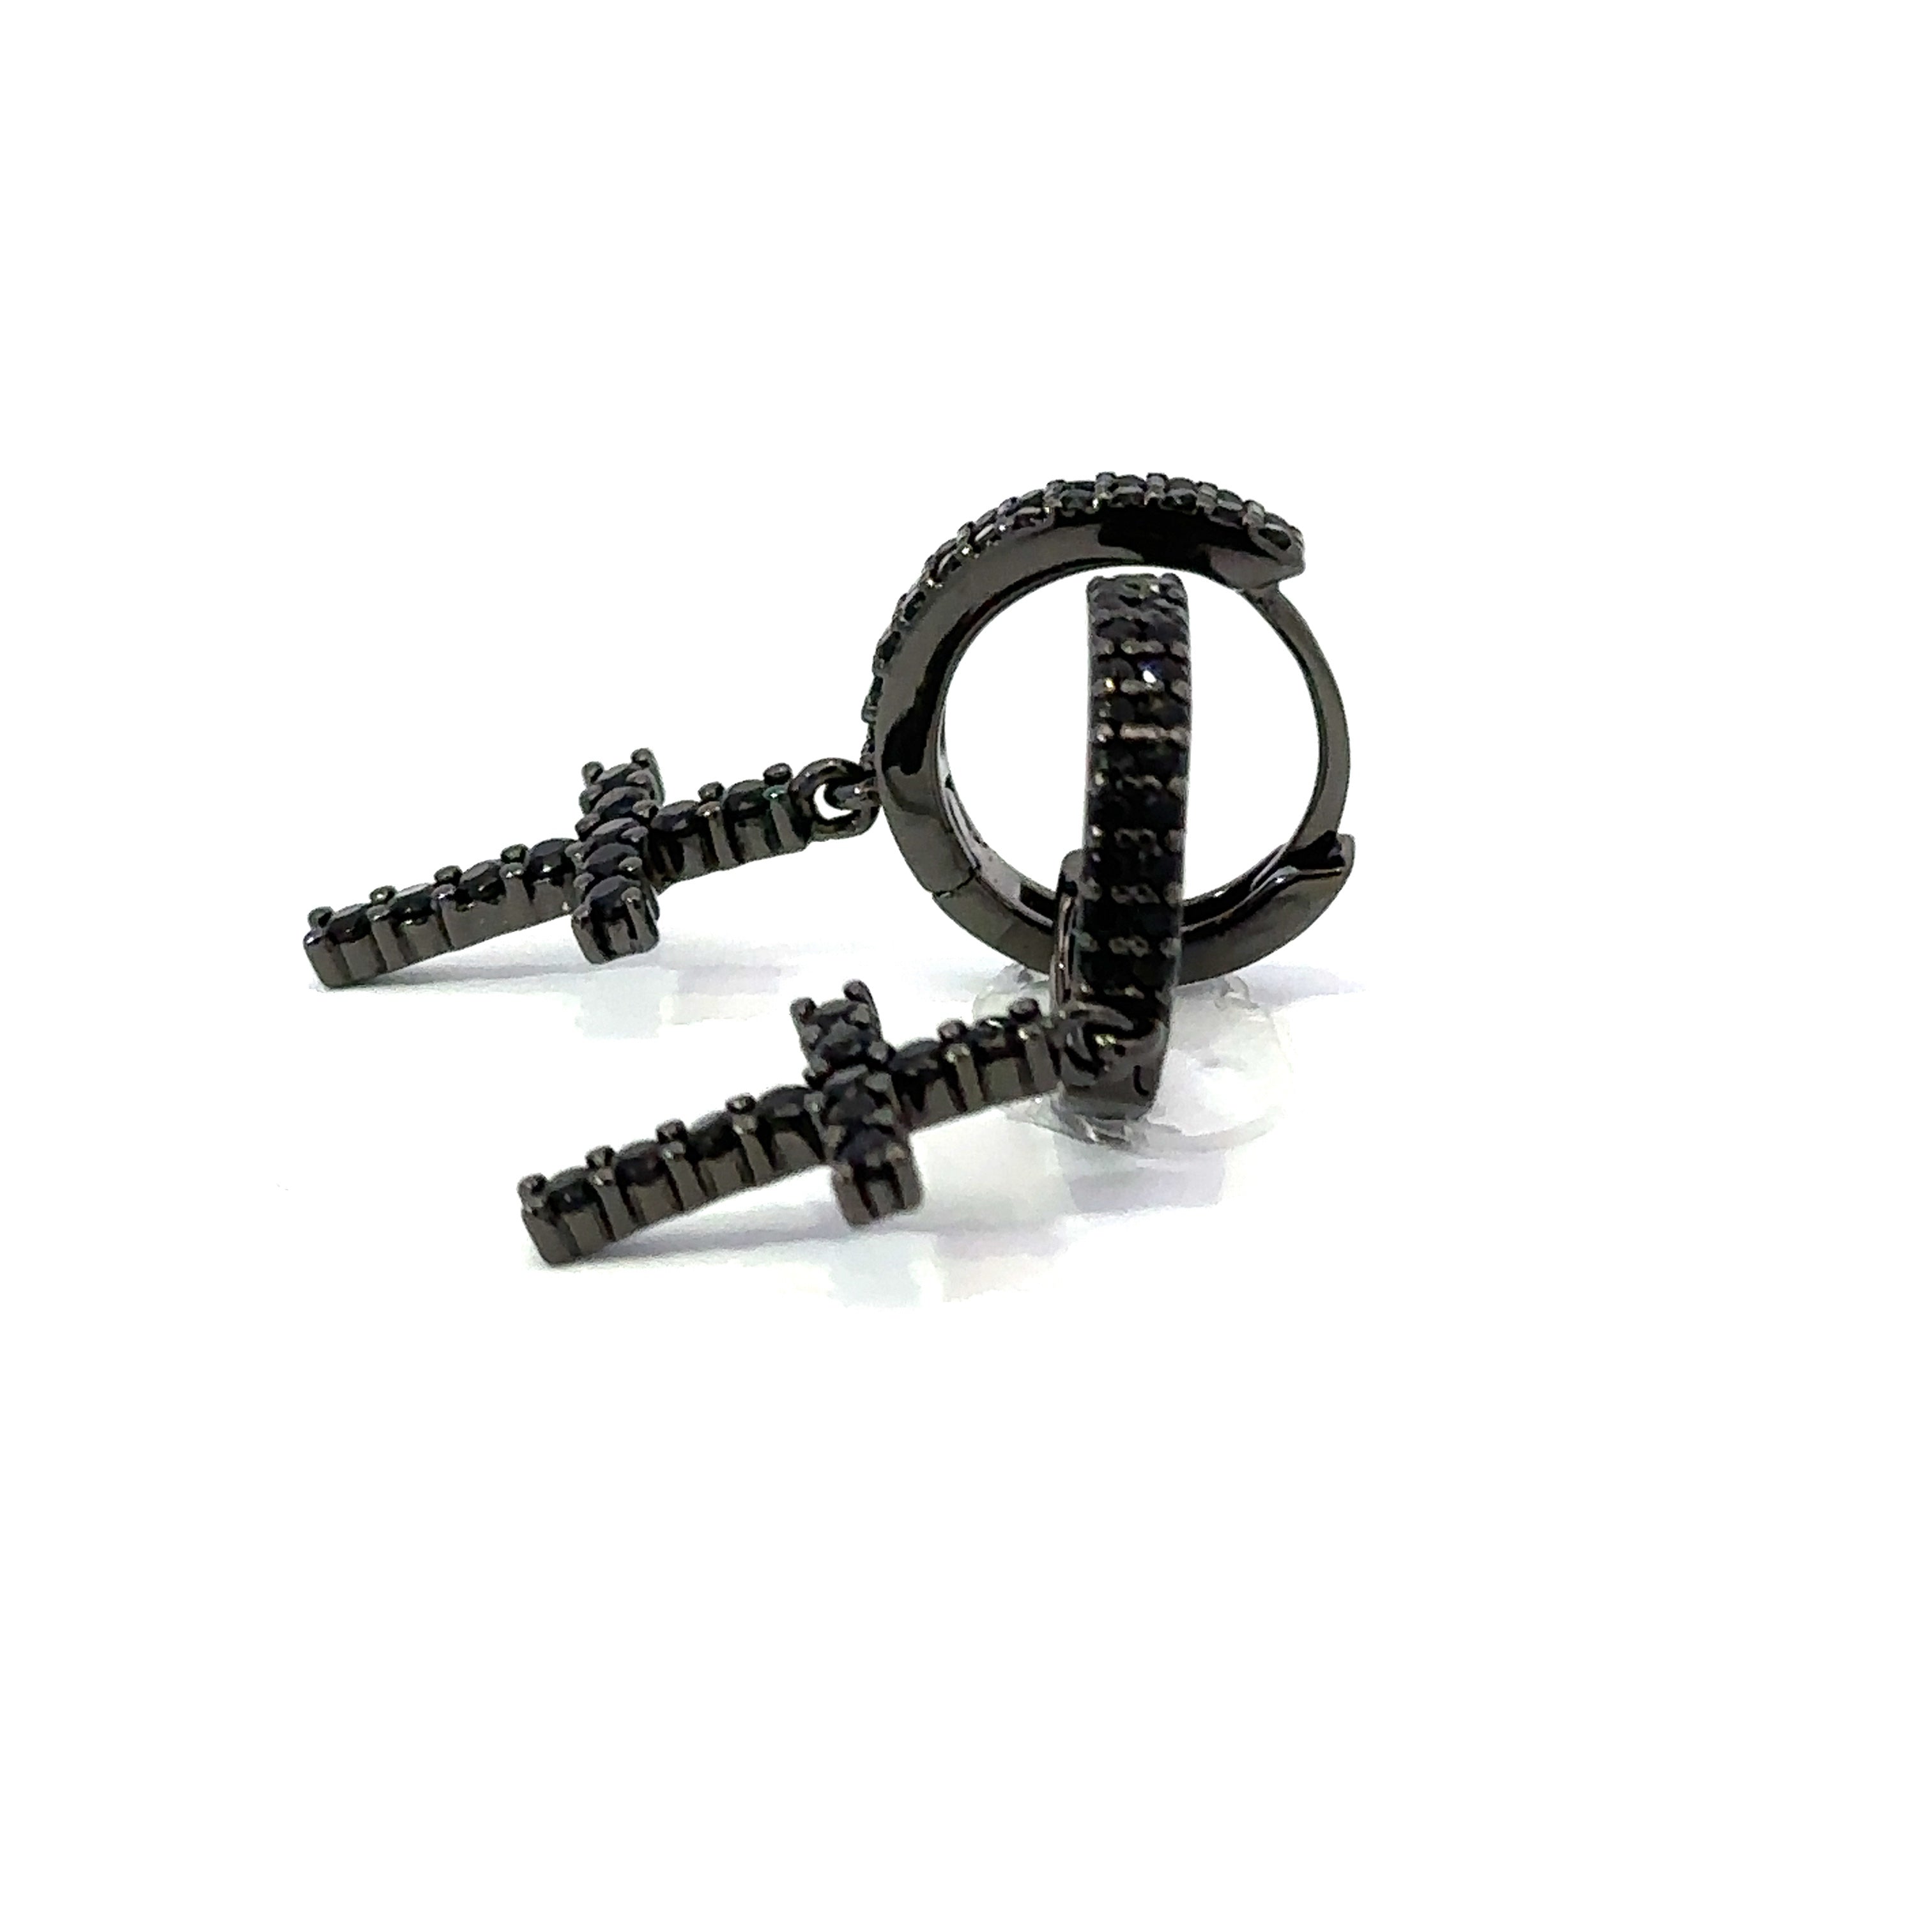 AQUILIA 925 CZ BLACK ICED OUT EARRINGS | 9214513